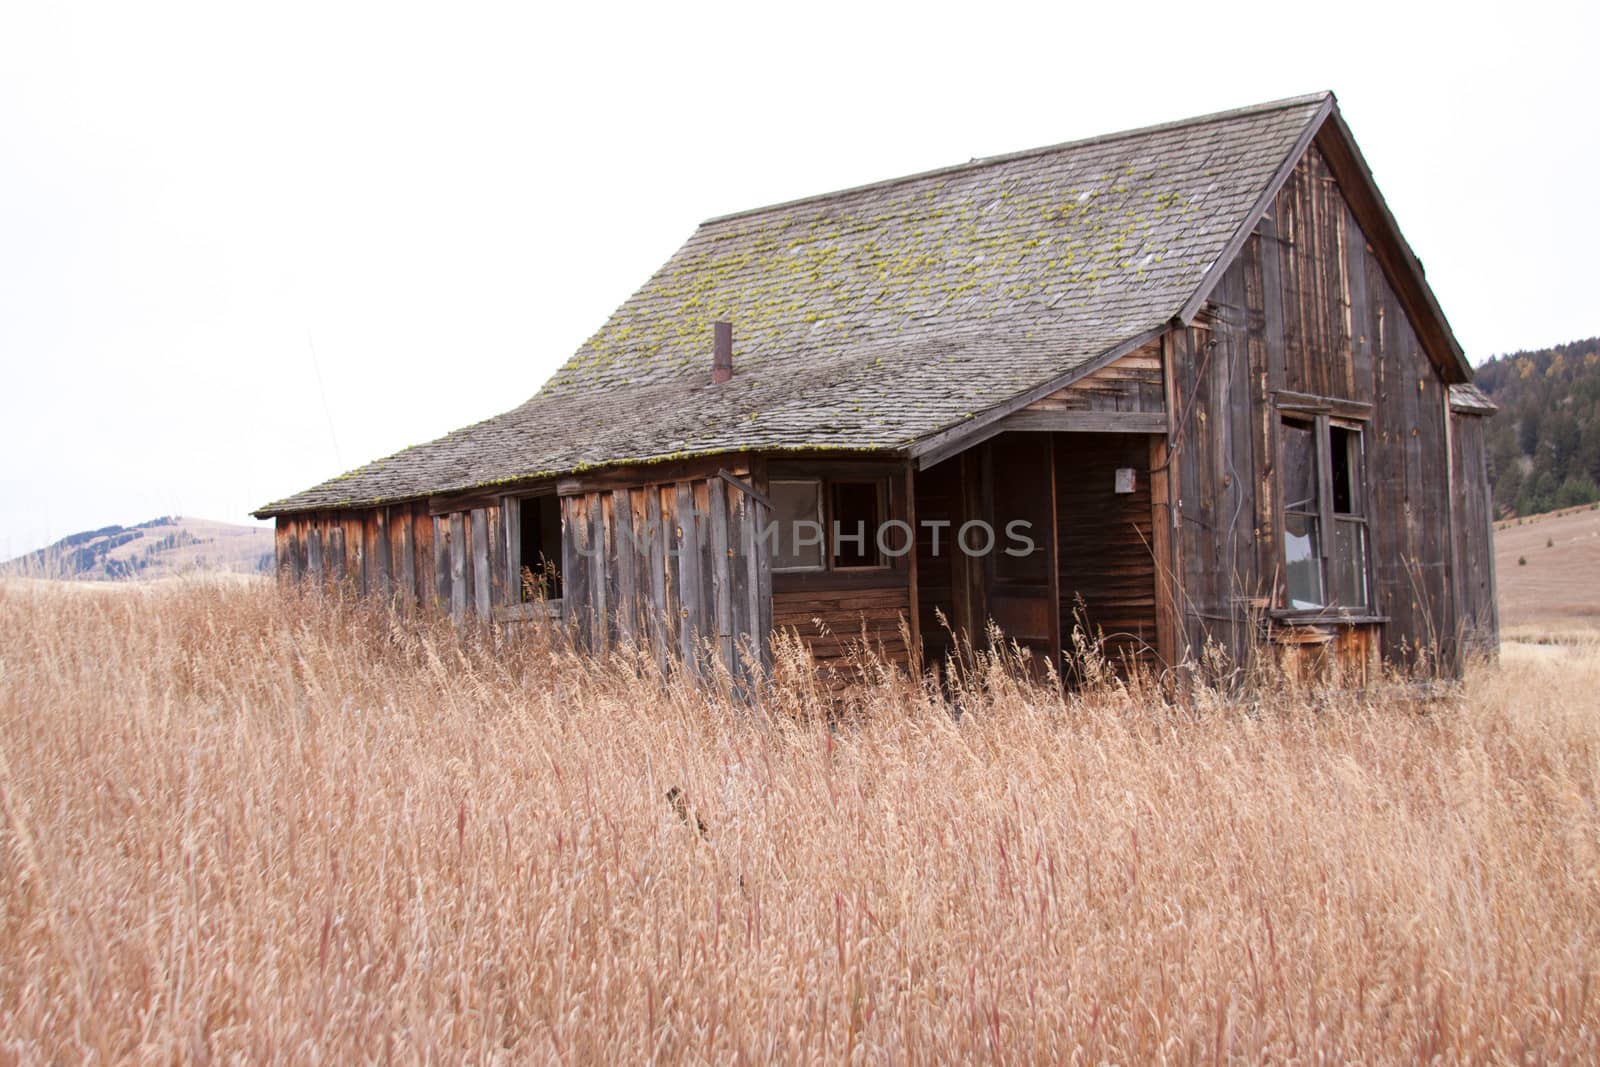 An old homestead/ghost town